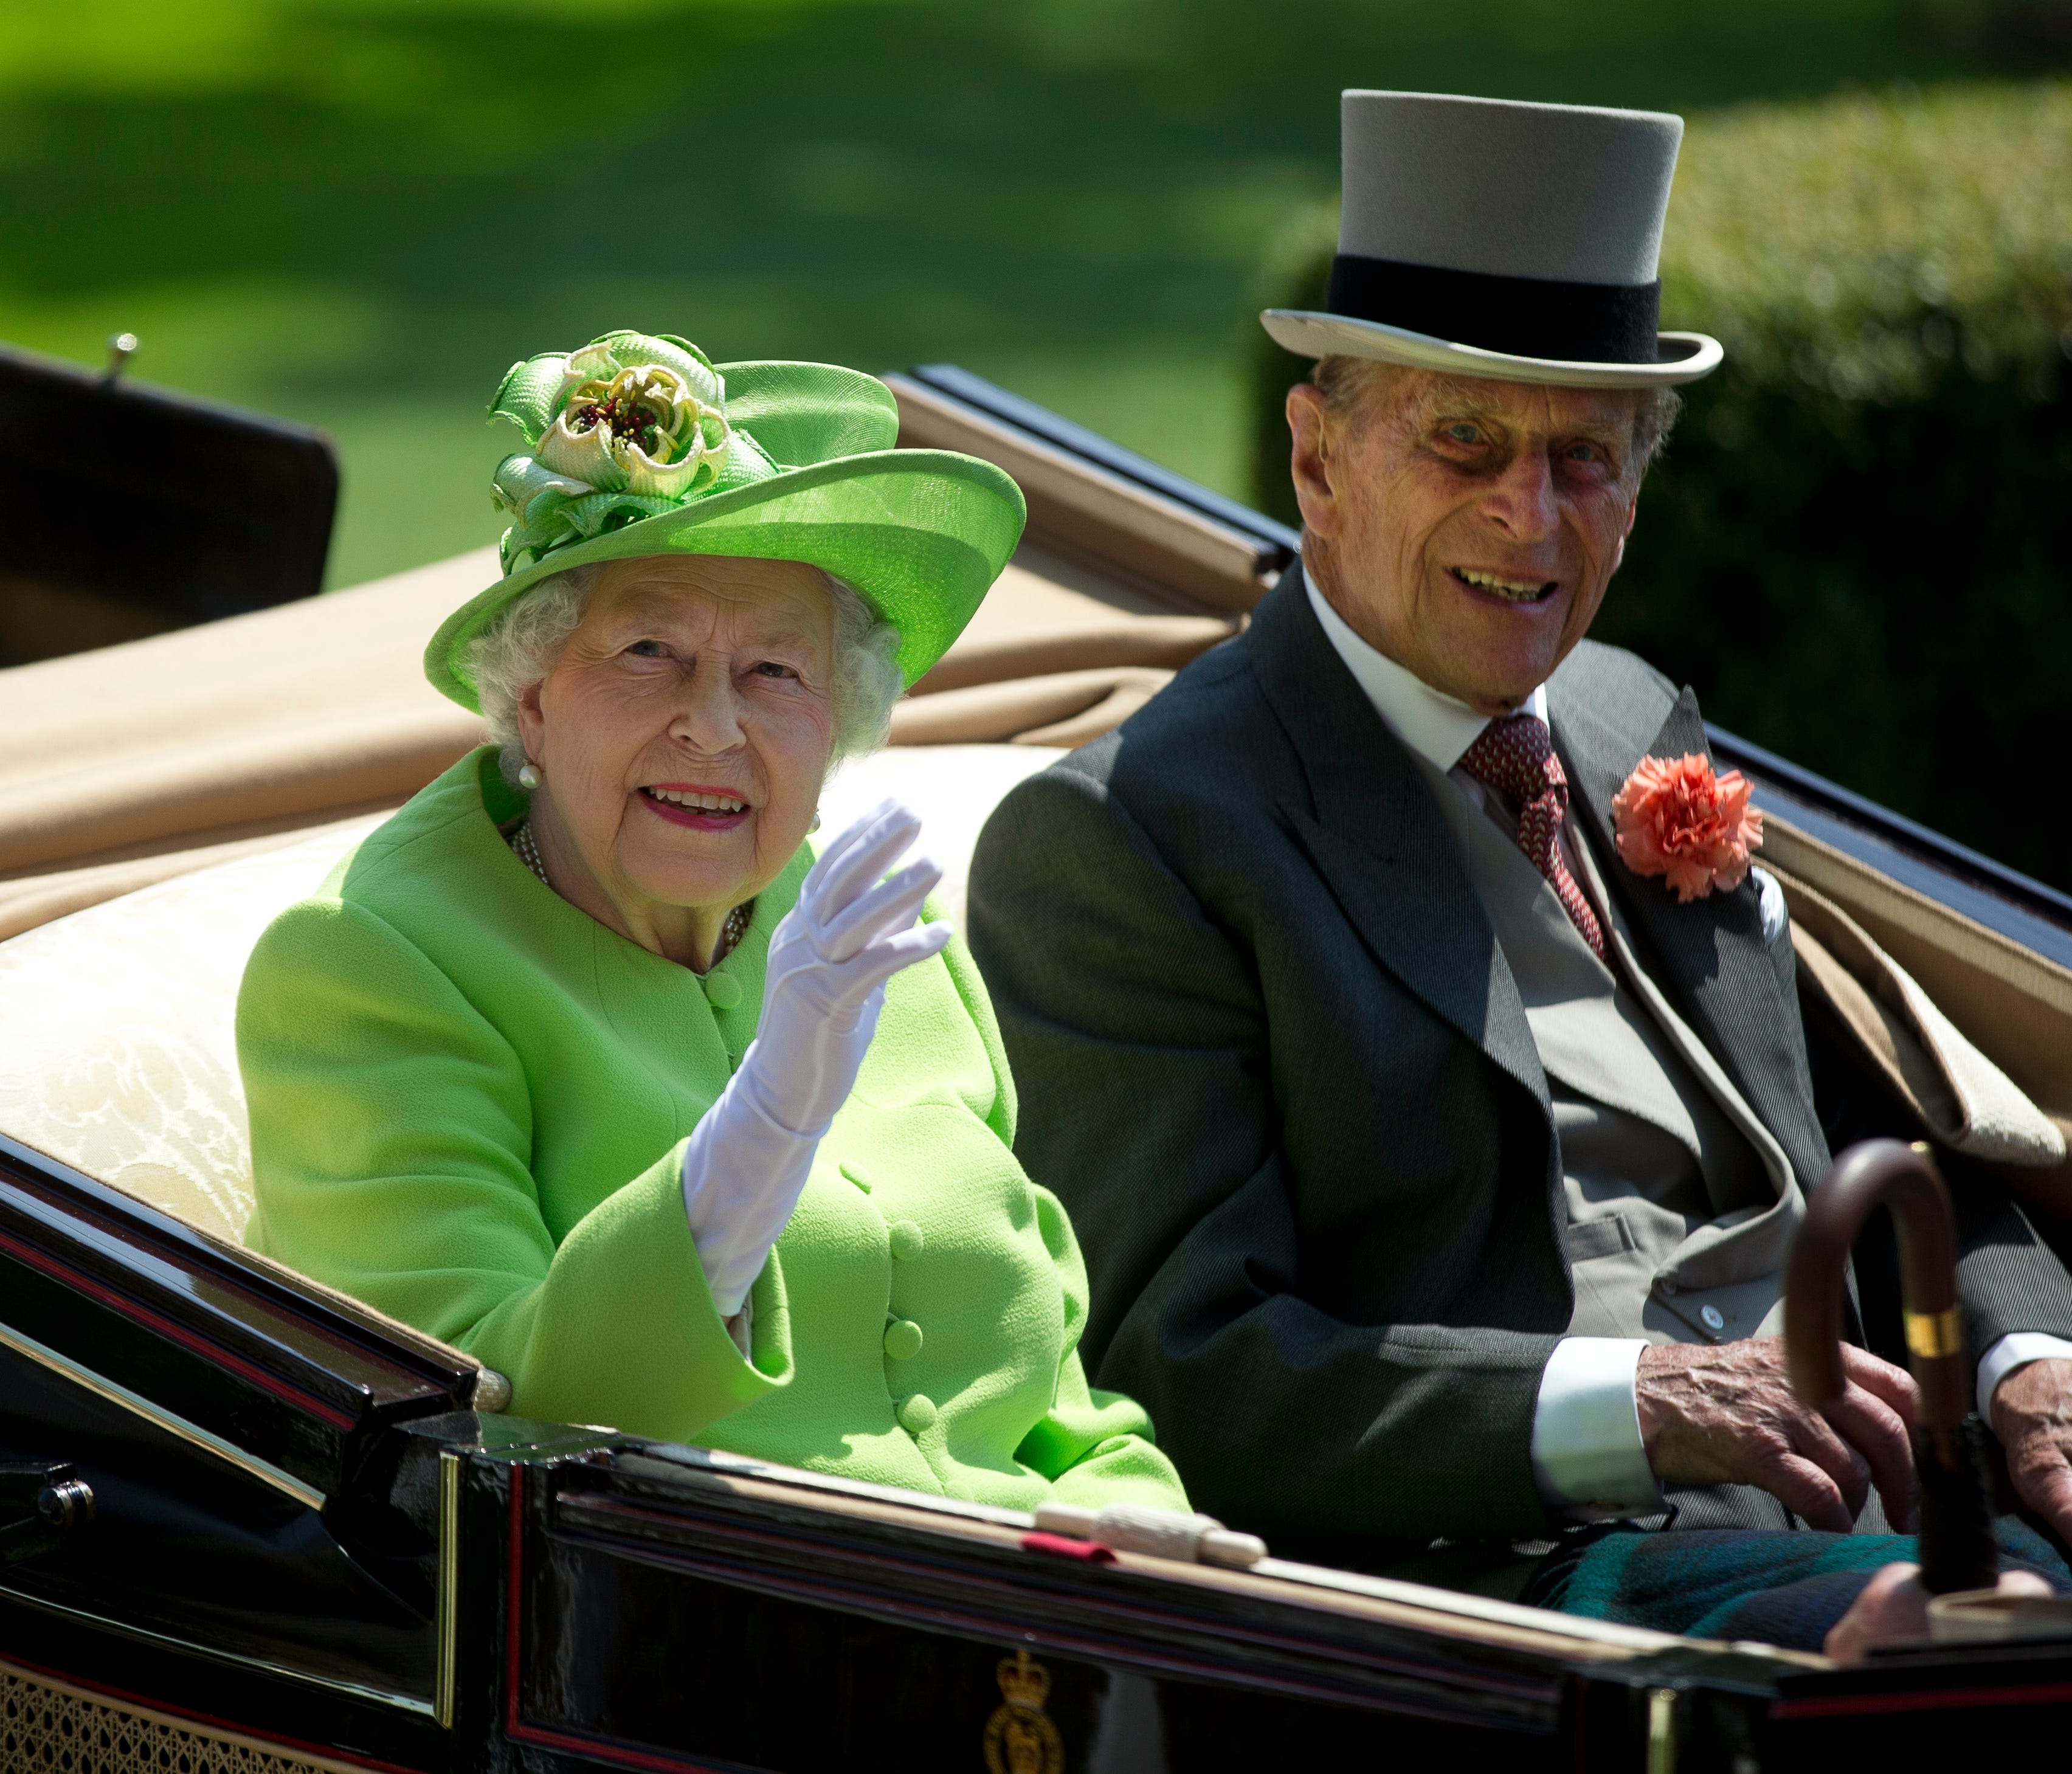 Britain's Queen Elizabeth II, left, waves to the crowd with Prince Philip at right, as they arrive by open carriage to the parade ring on the first day of the Royal Ascot horse race meeting in Ascot, England, Tuesday, June 20, 2017. (AP Photo/Alastai